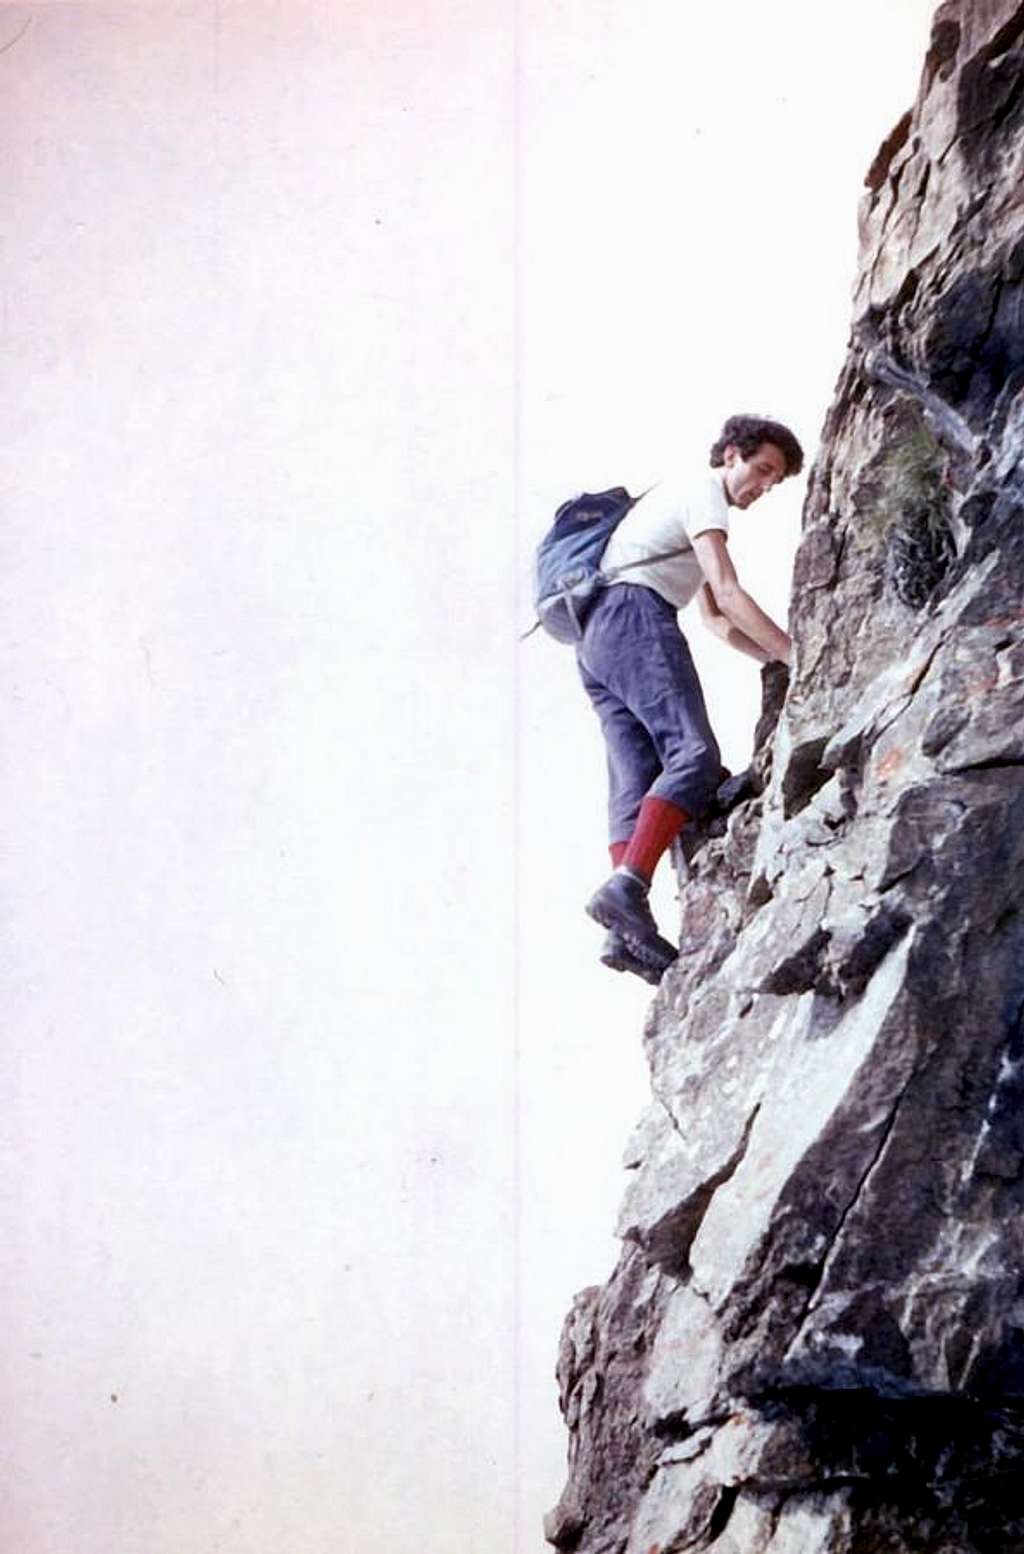 The last ascent together